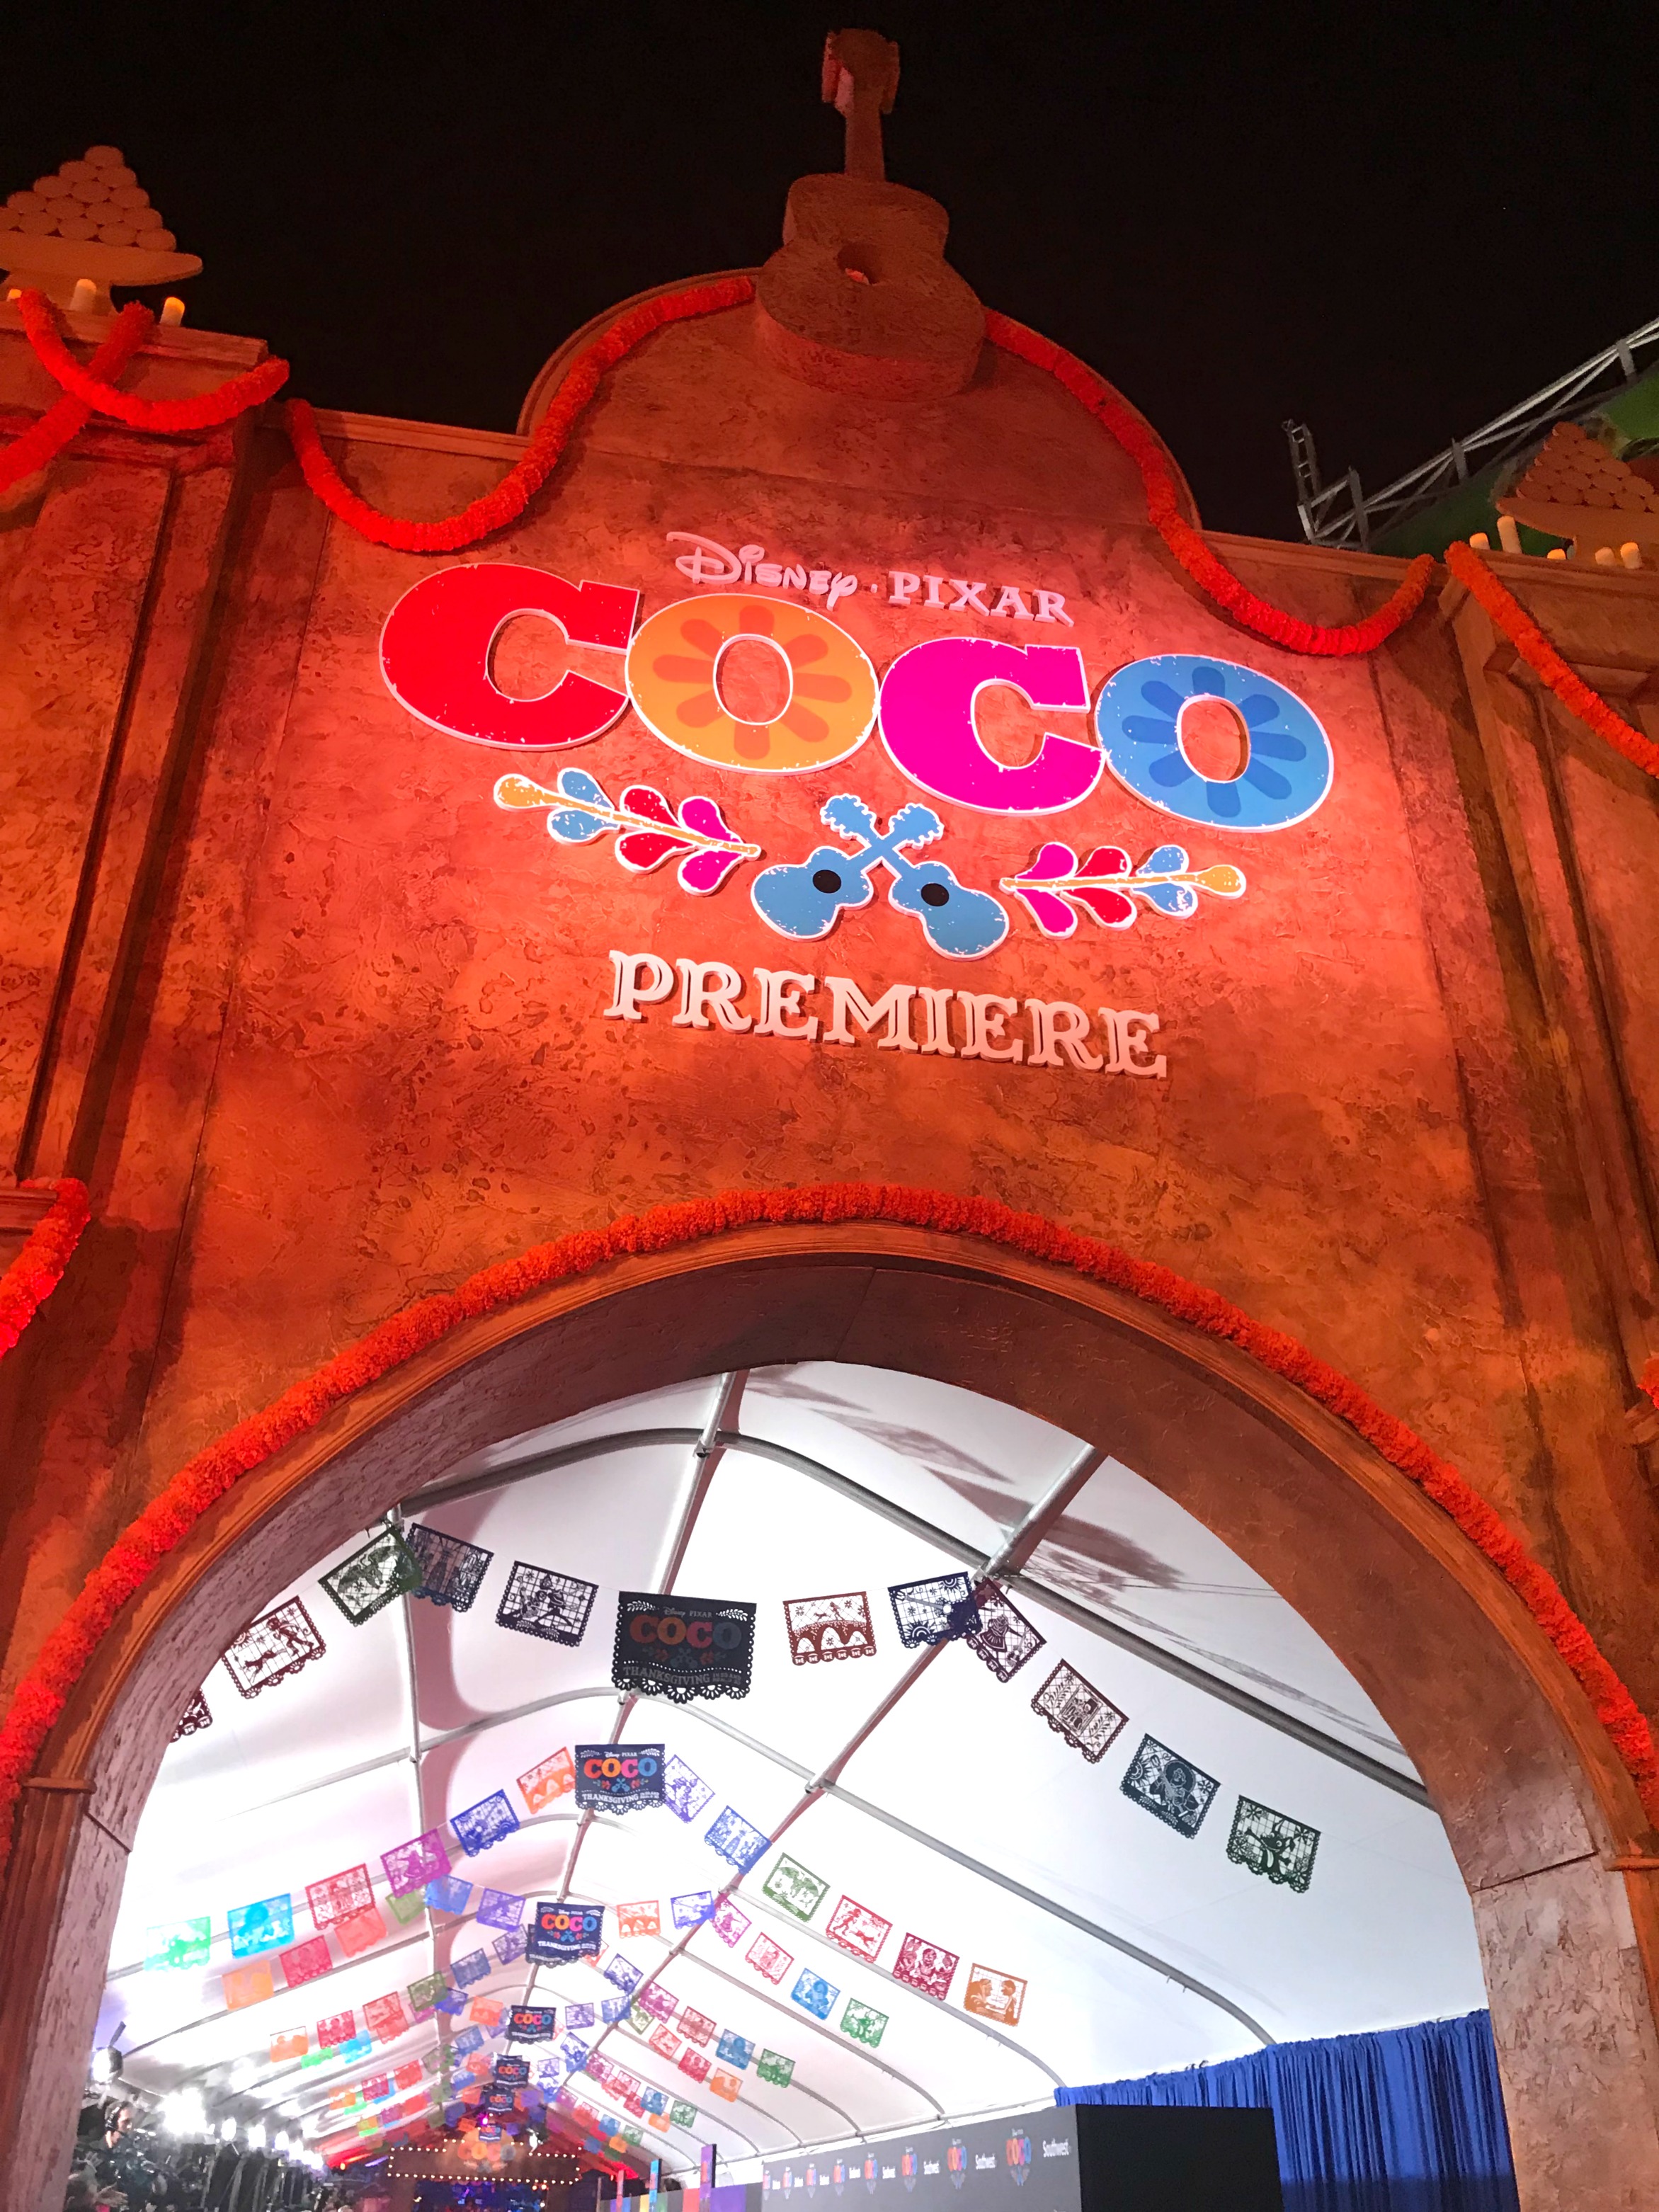 The Coco Premiere was a Magical Experience